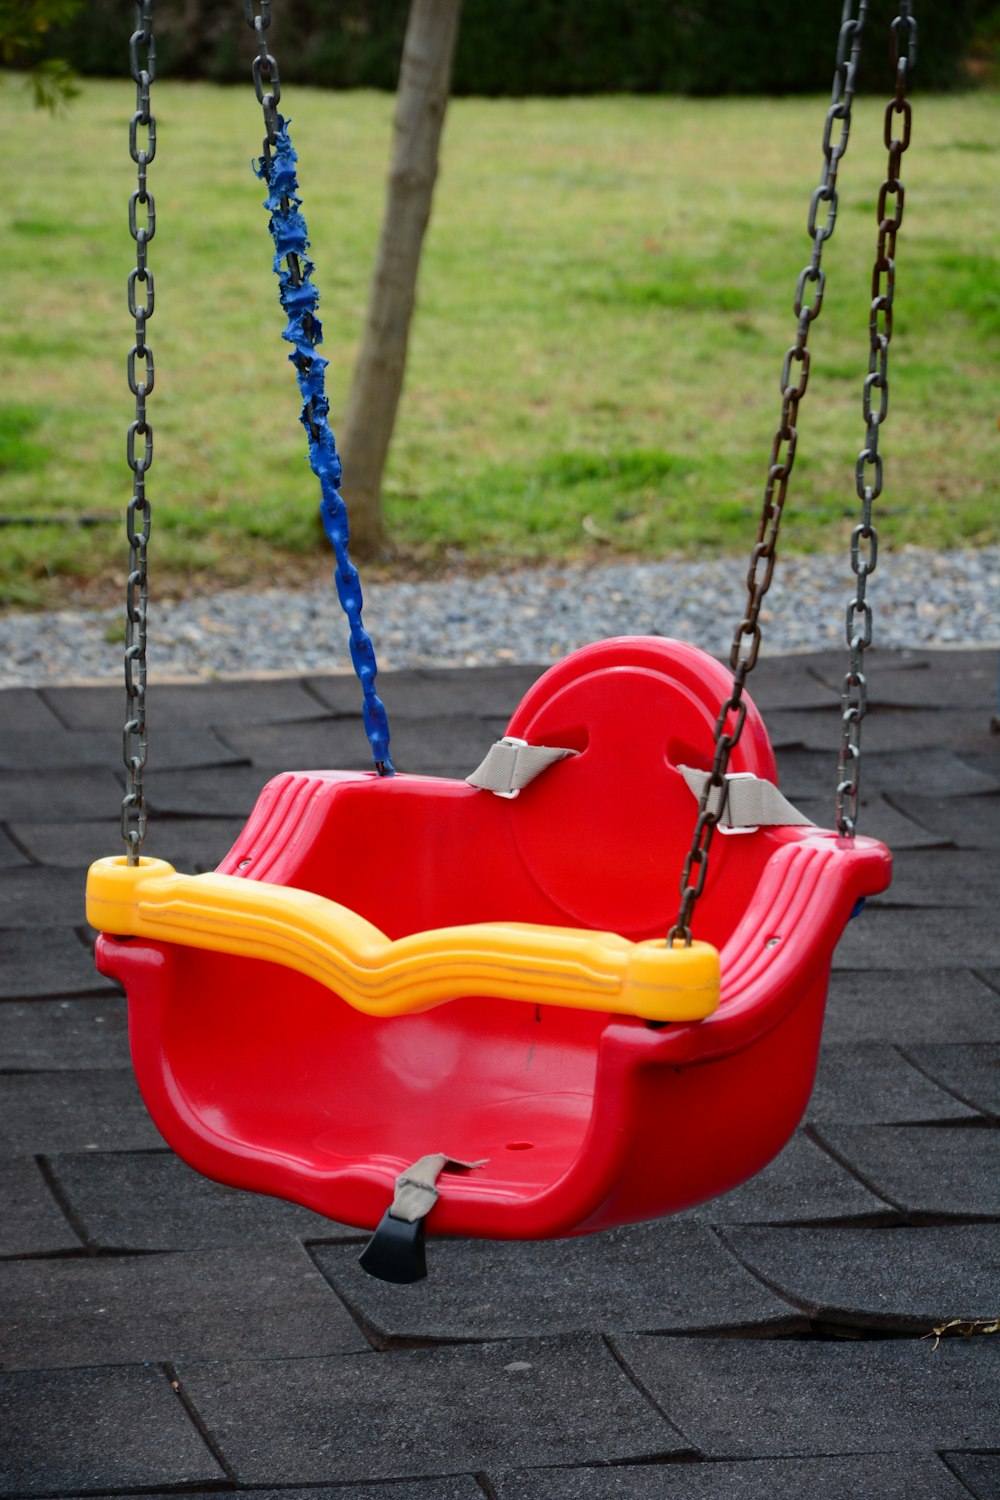 a red swing with a yellow seat on a brick patio